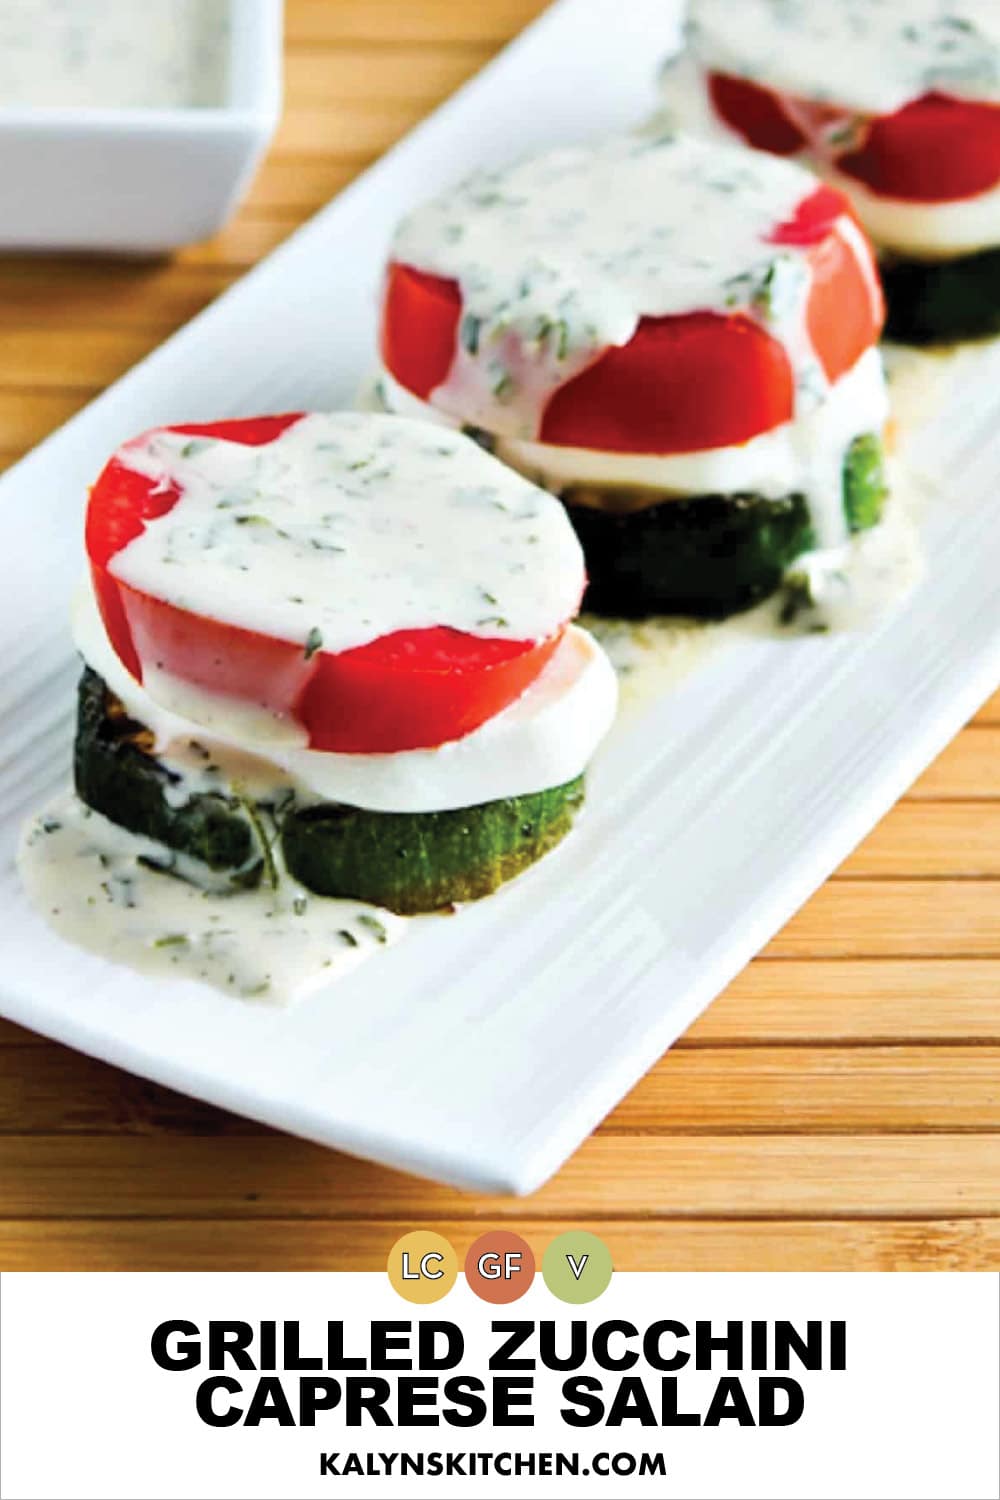 Pinterest image of Grilled Zucchini Caprese Salad